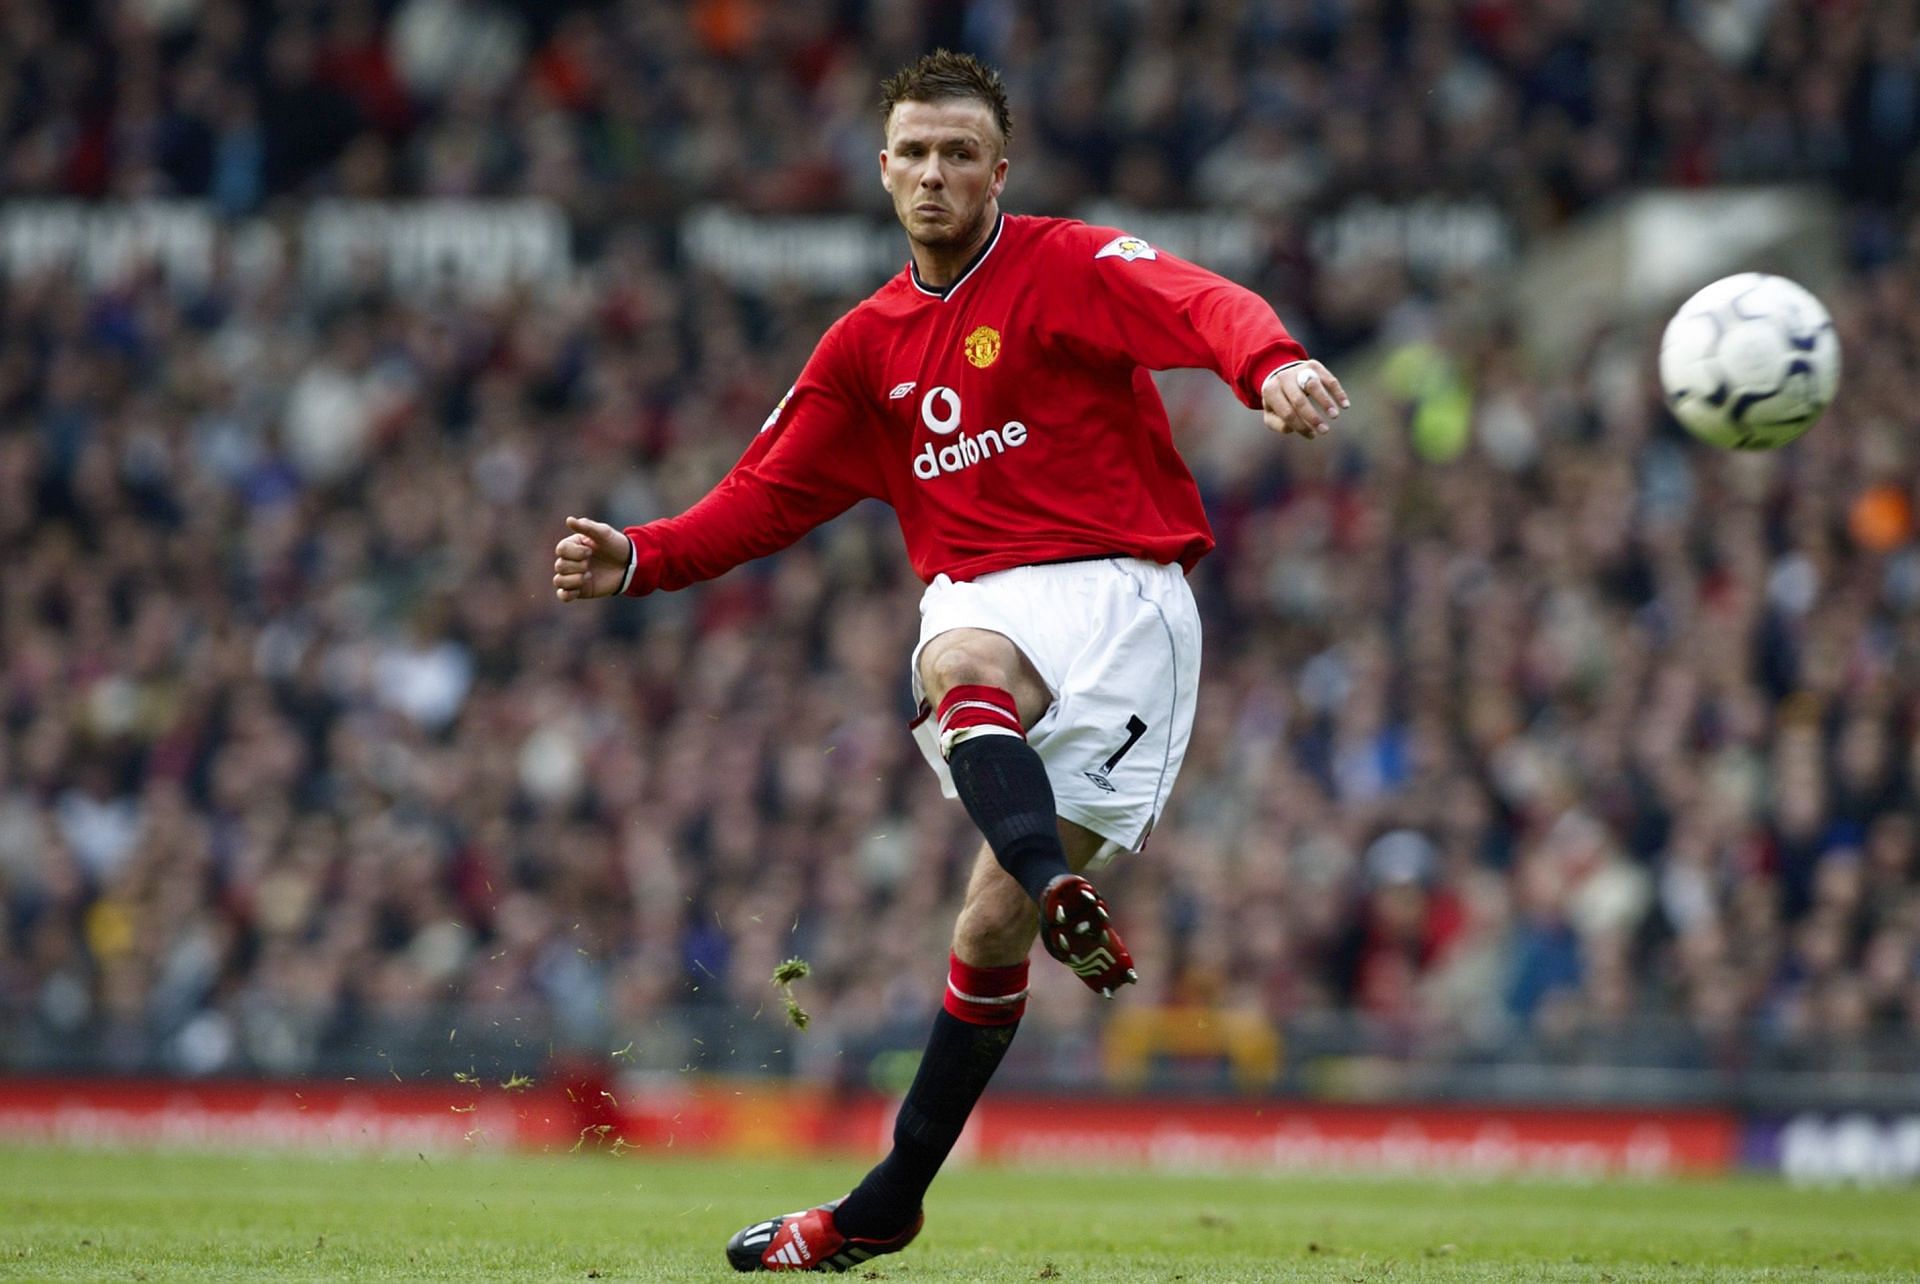 David Beckham takes a free-kick for Manchester United